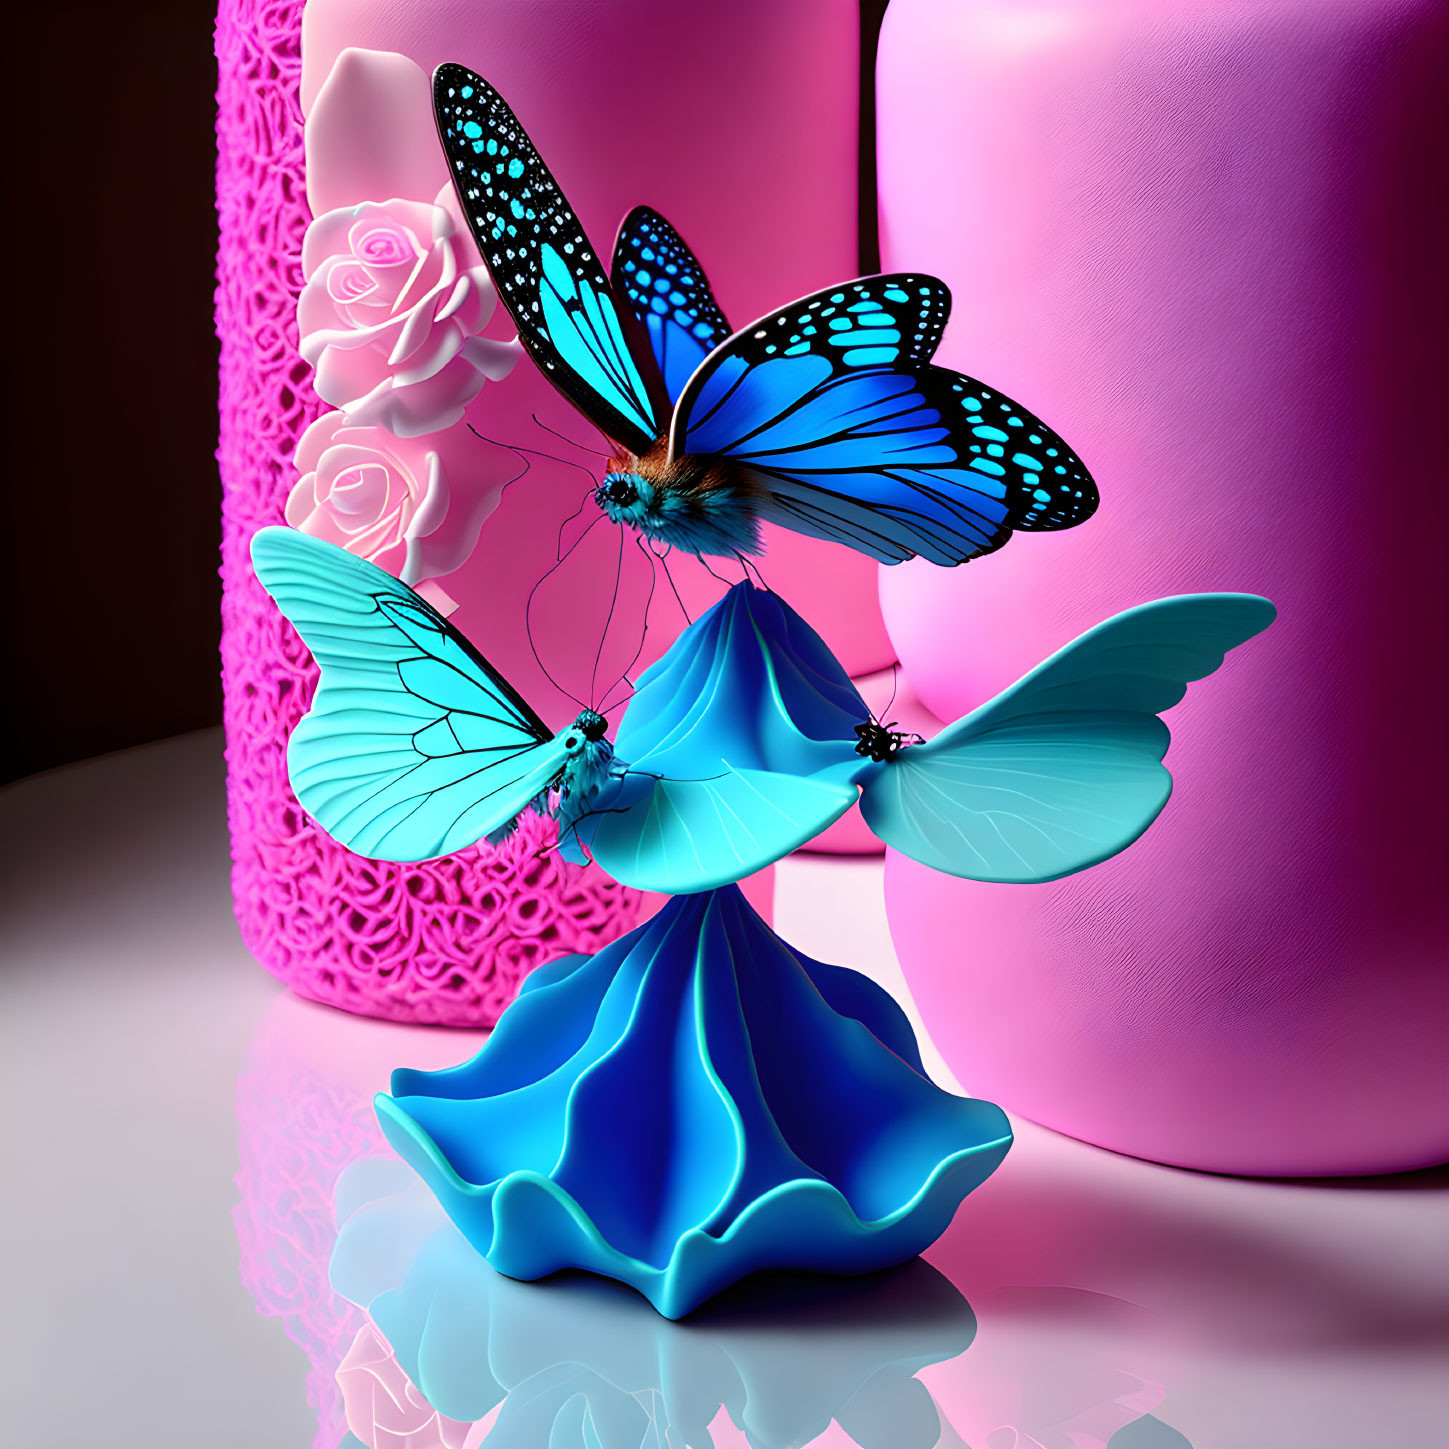 Three Vibrant Blue Butterflies on Sculpted Blue Cloth with Pink Textured Background